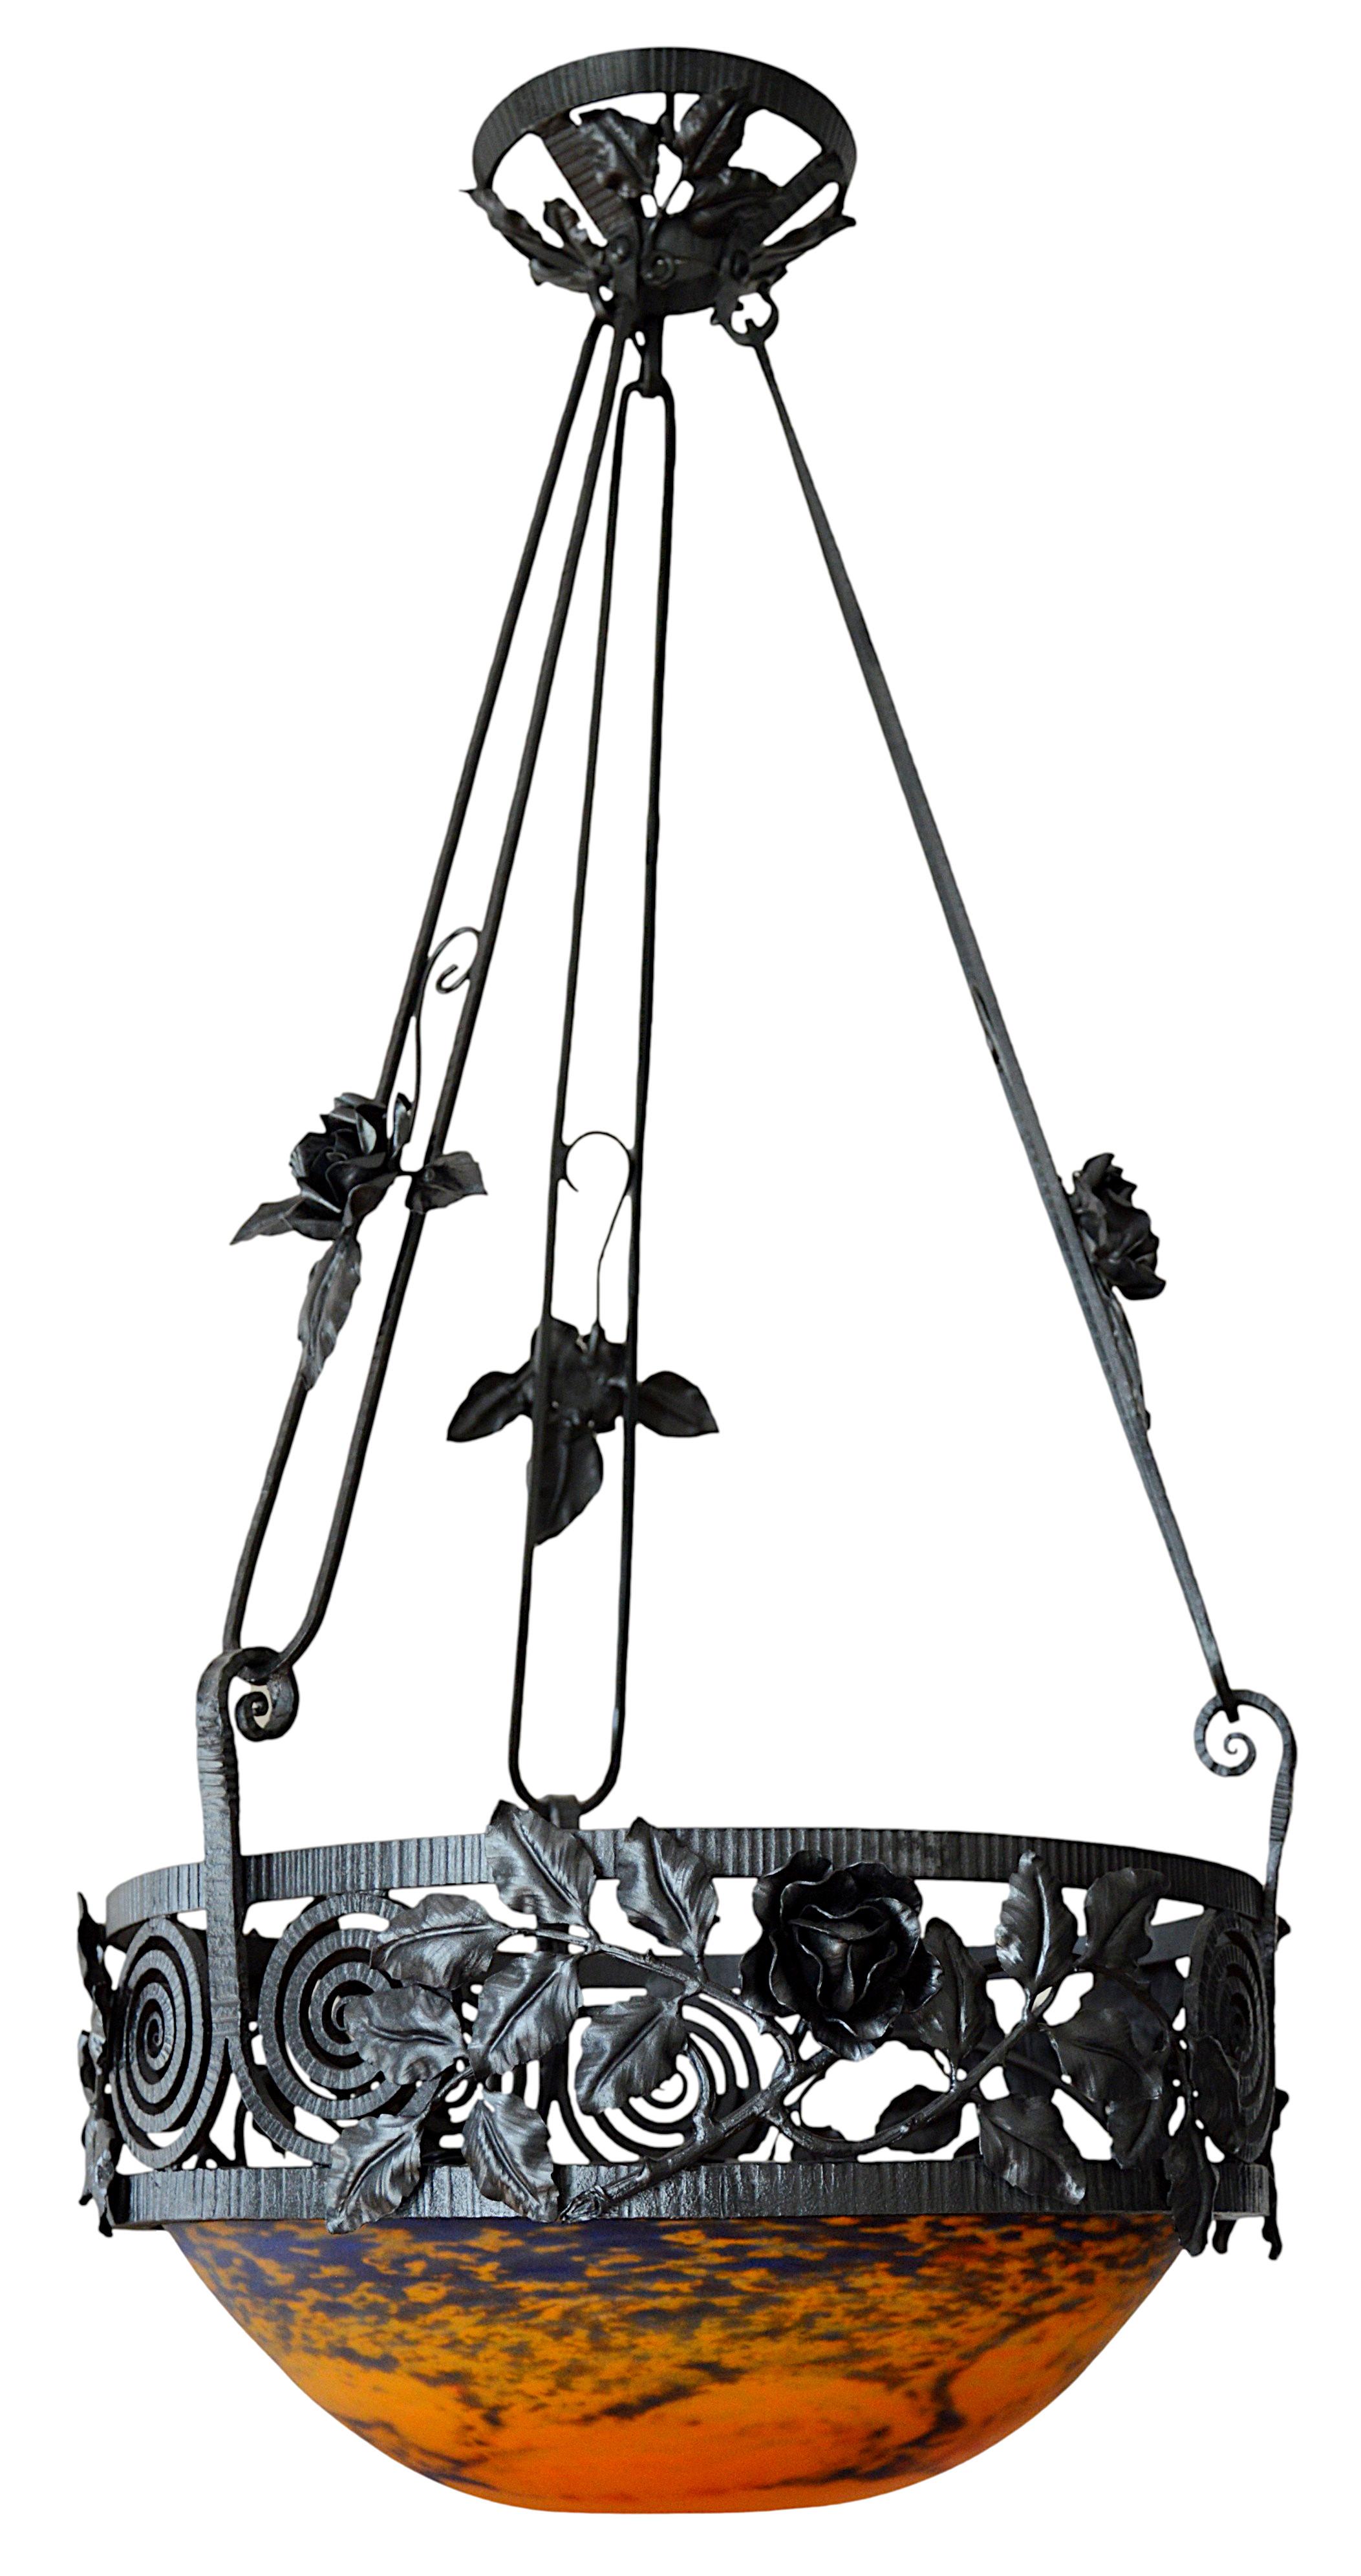 Jean Noverdy French Art Deco Wrought-Iron Pendant Chandelier, Late 1920s For Sale 3